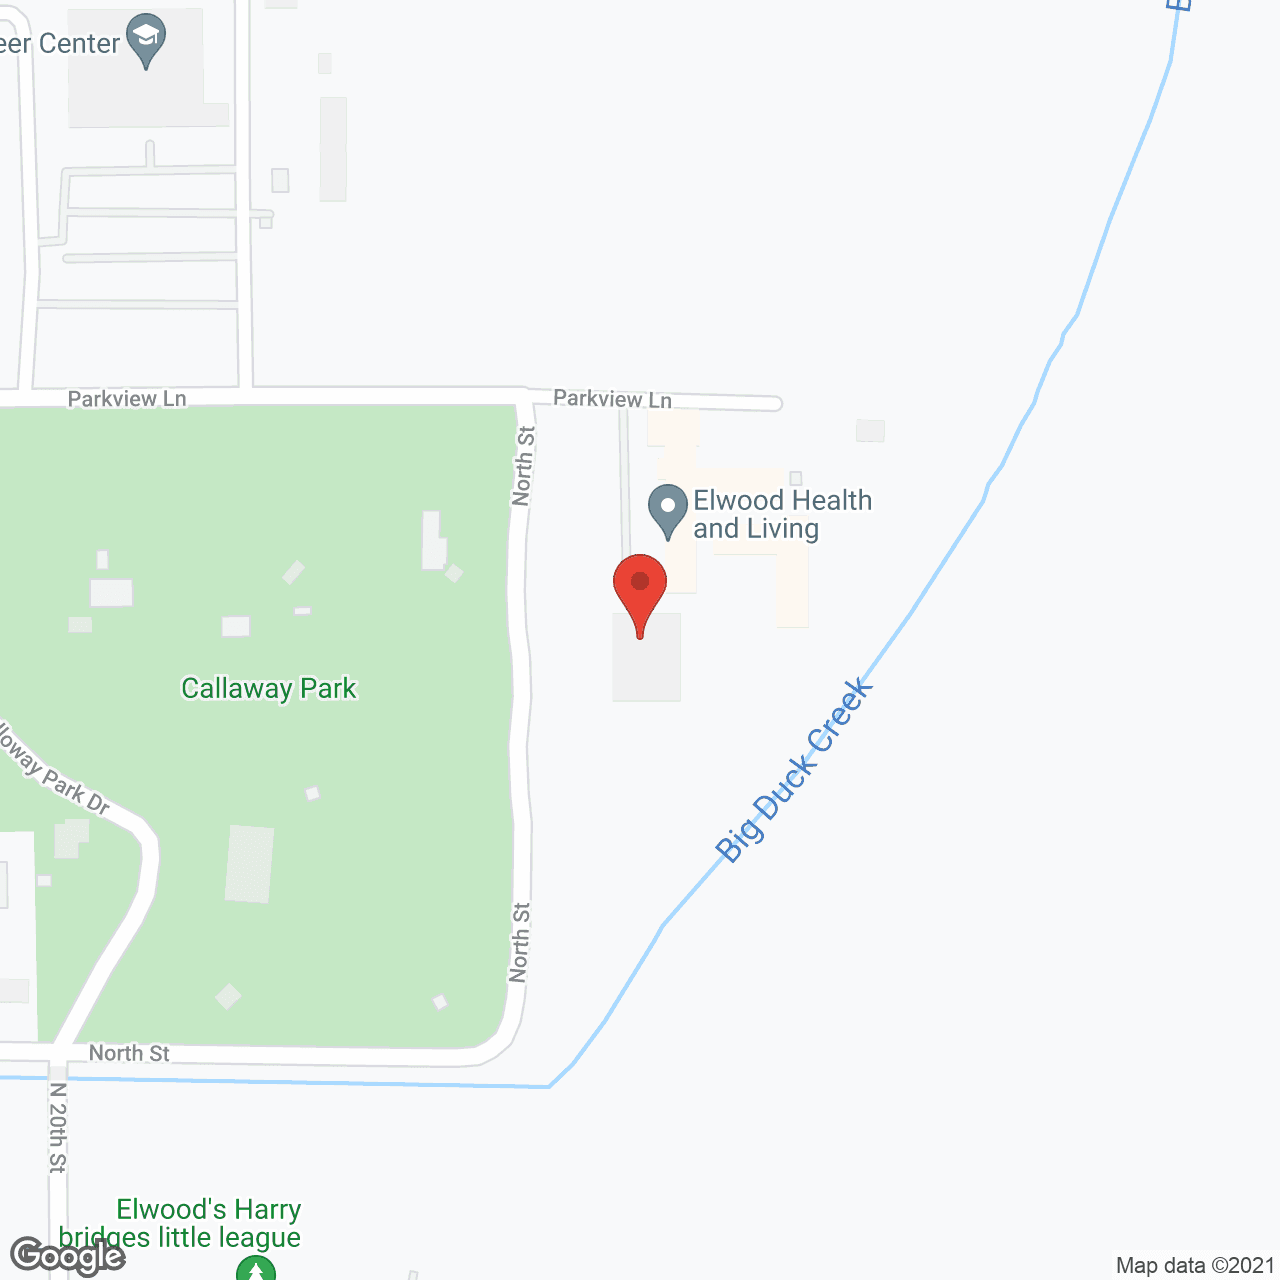 Park Place Assisted Living in google map